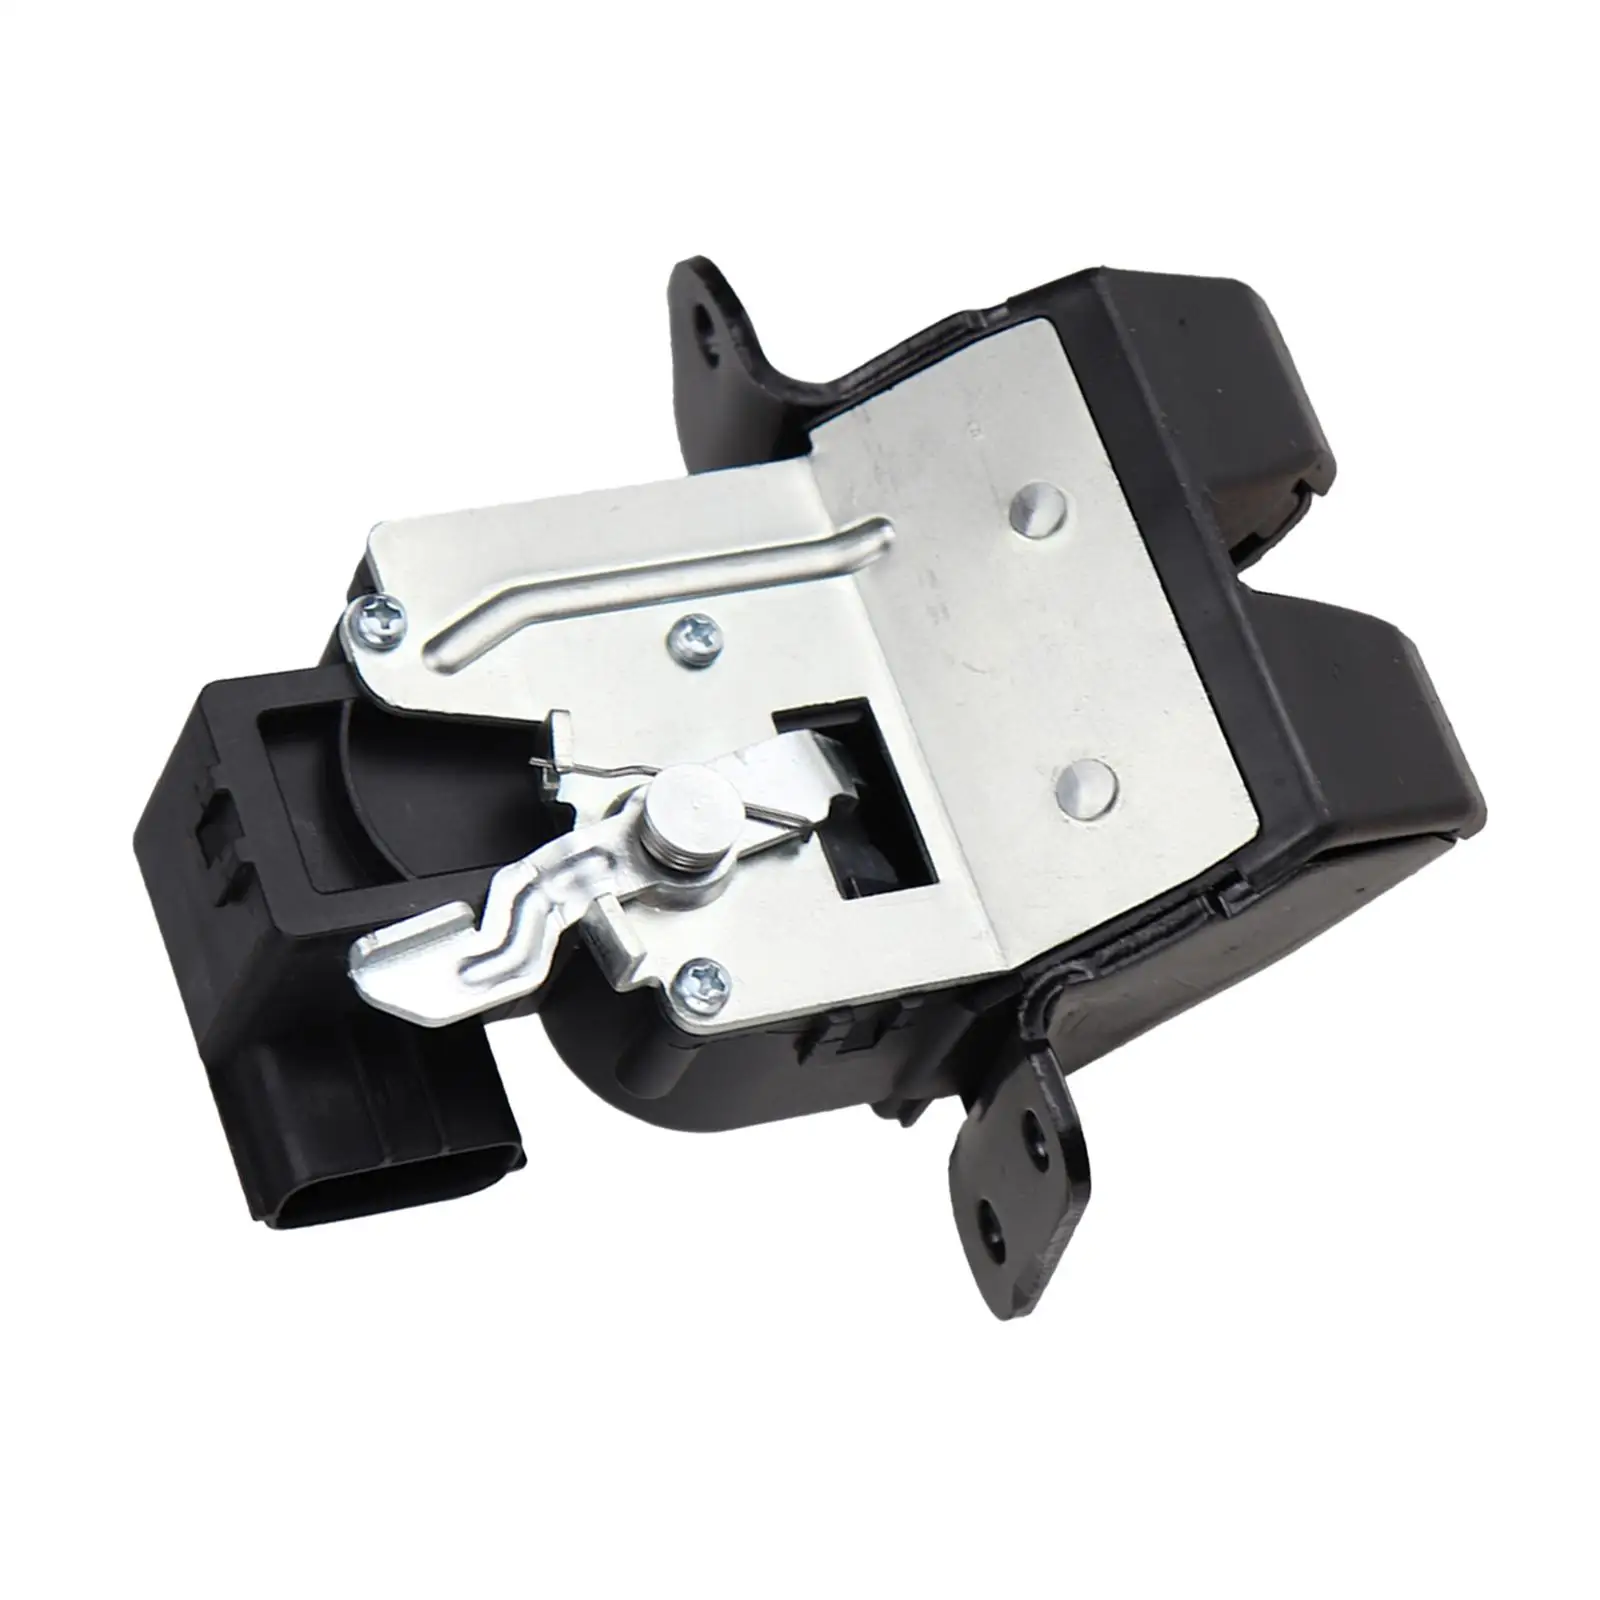 Tail Gate Latch Lock, 81230A5000, Fit for Hyundai Elantra GT i30, Spare Parts